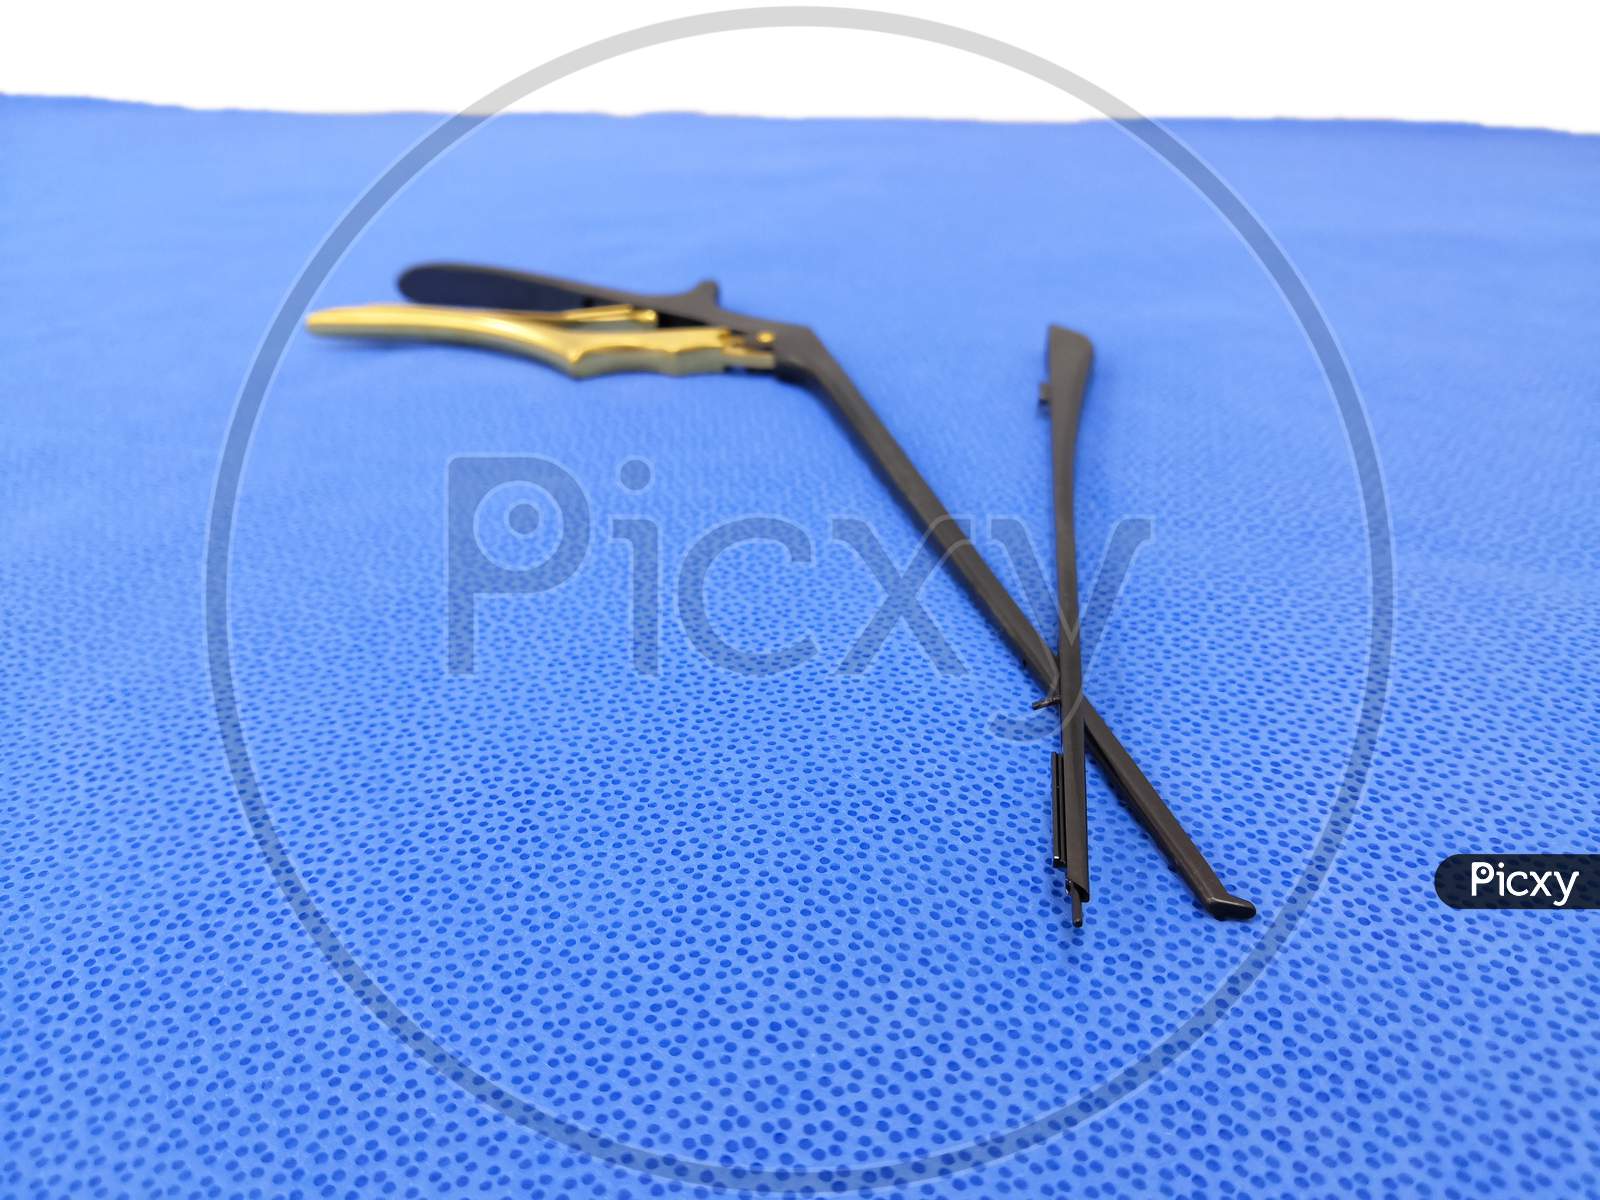 Disassembly Of Surgical Instrument Kerrison Punch Forceps